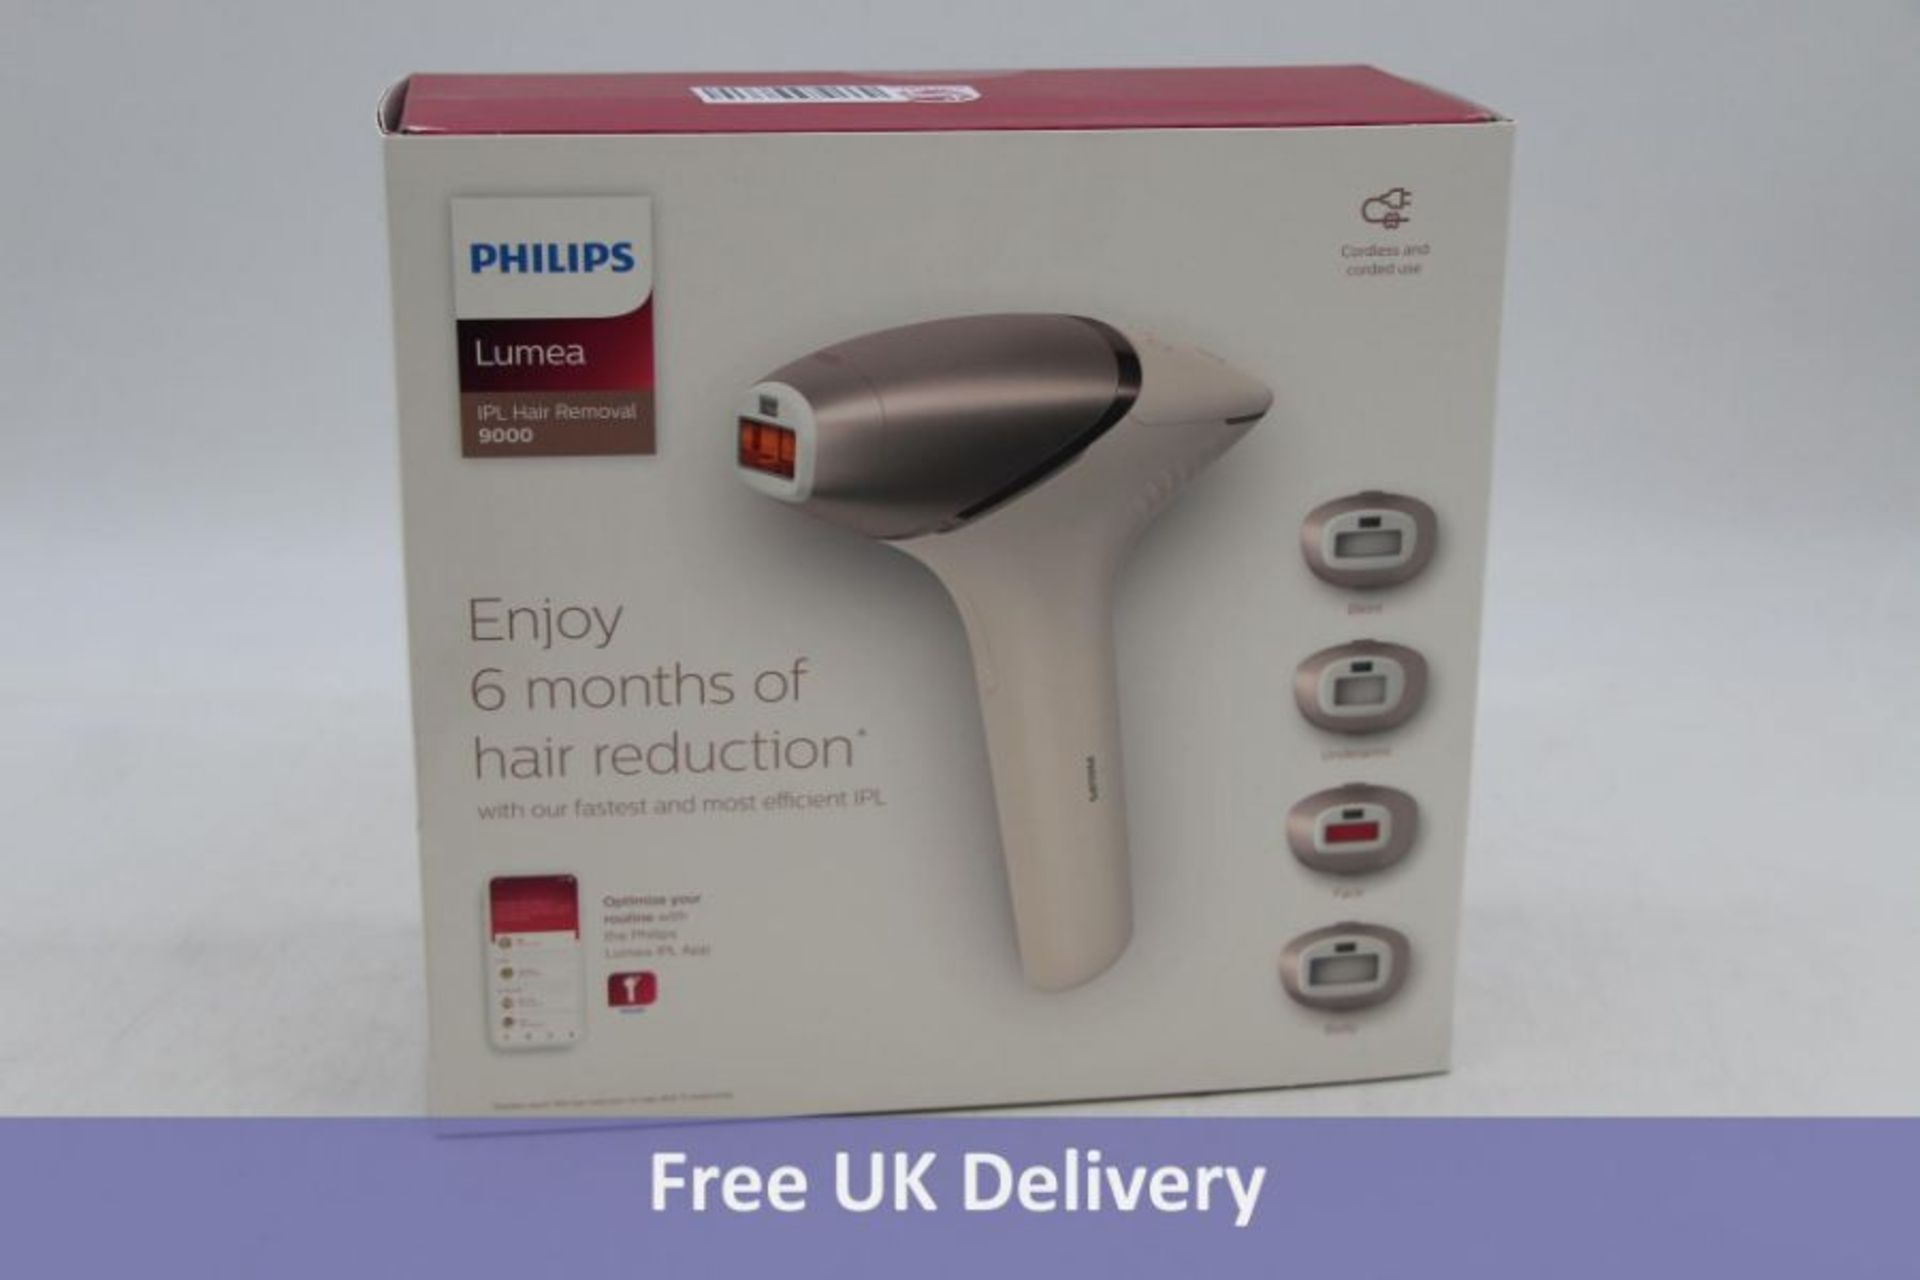 Philips Lumea IPL 9000 Hair Removal Device, Pink